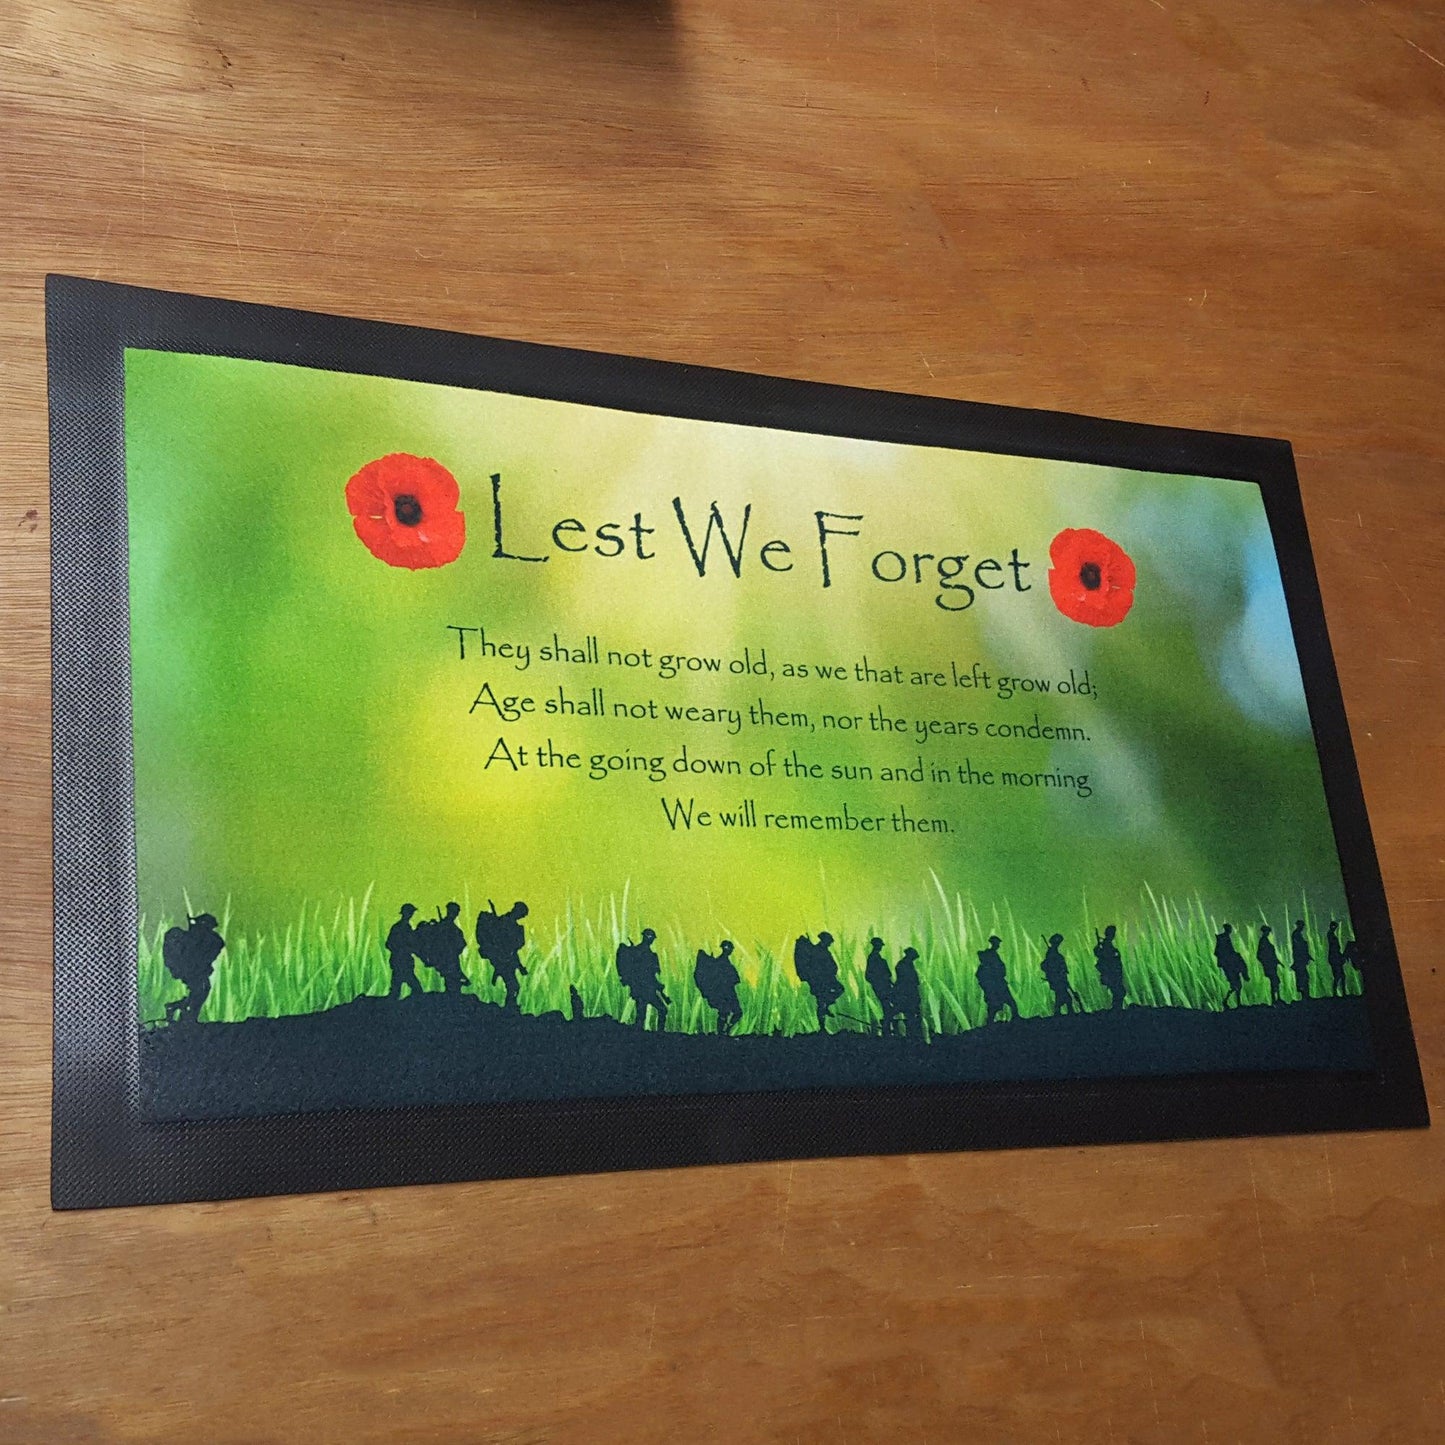 Personalised Bar Runner 44 x 25cm (17.3 x 9.8") Bar Mat Lest We Forget Military Poppy Green Background - shopquality4u